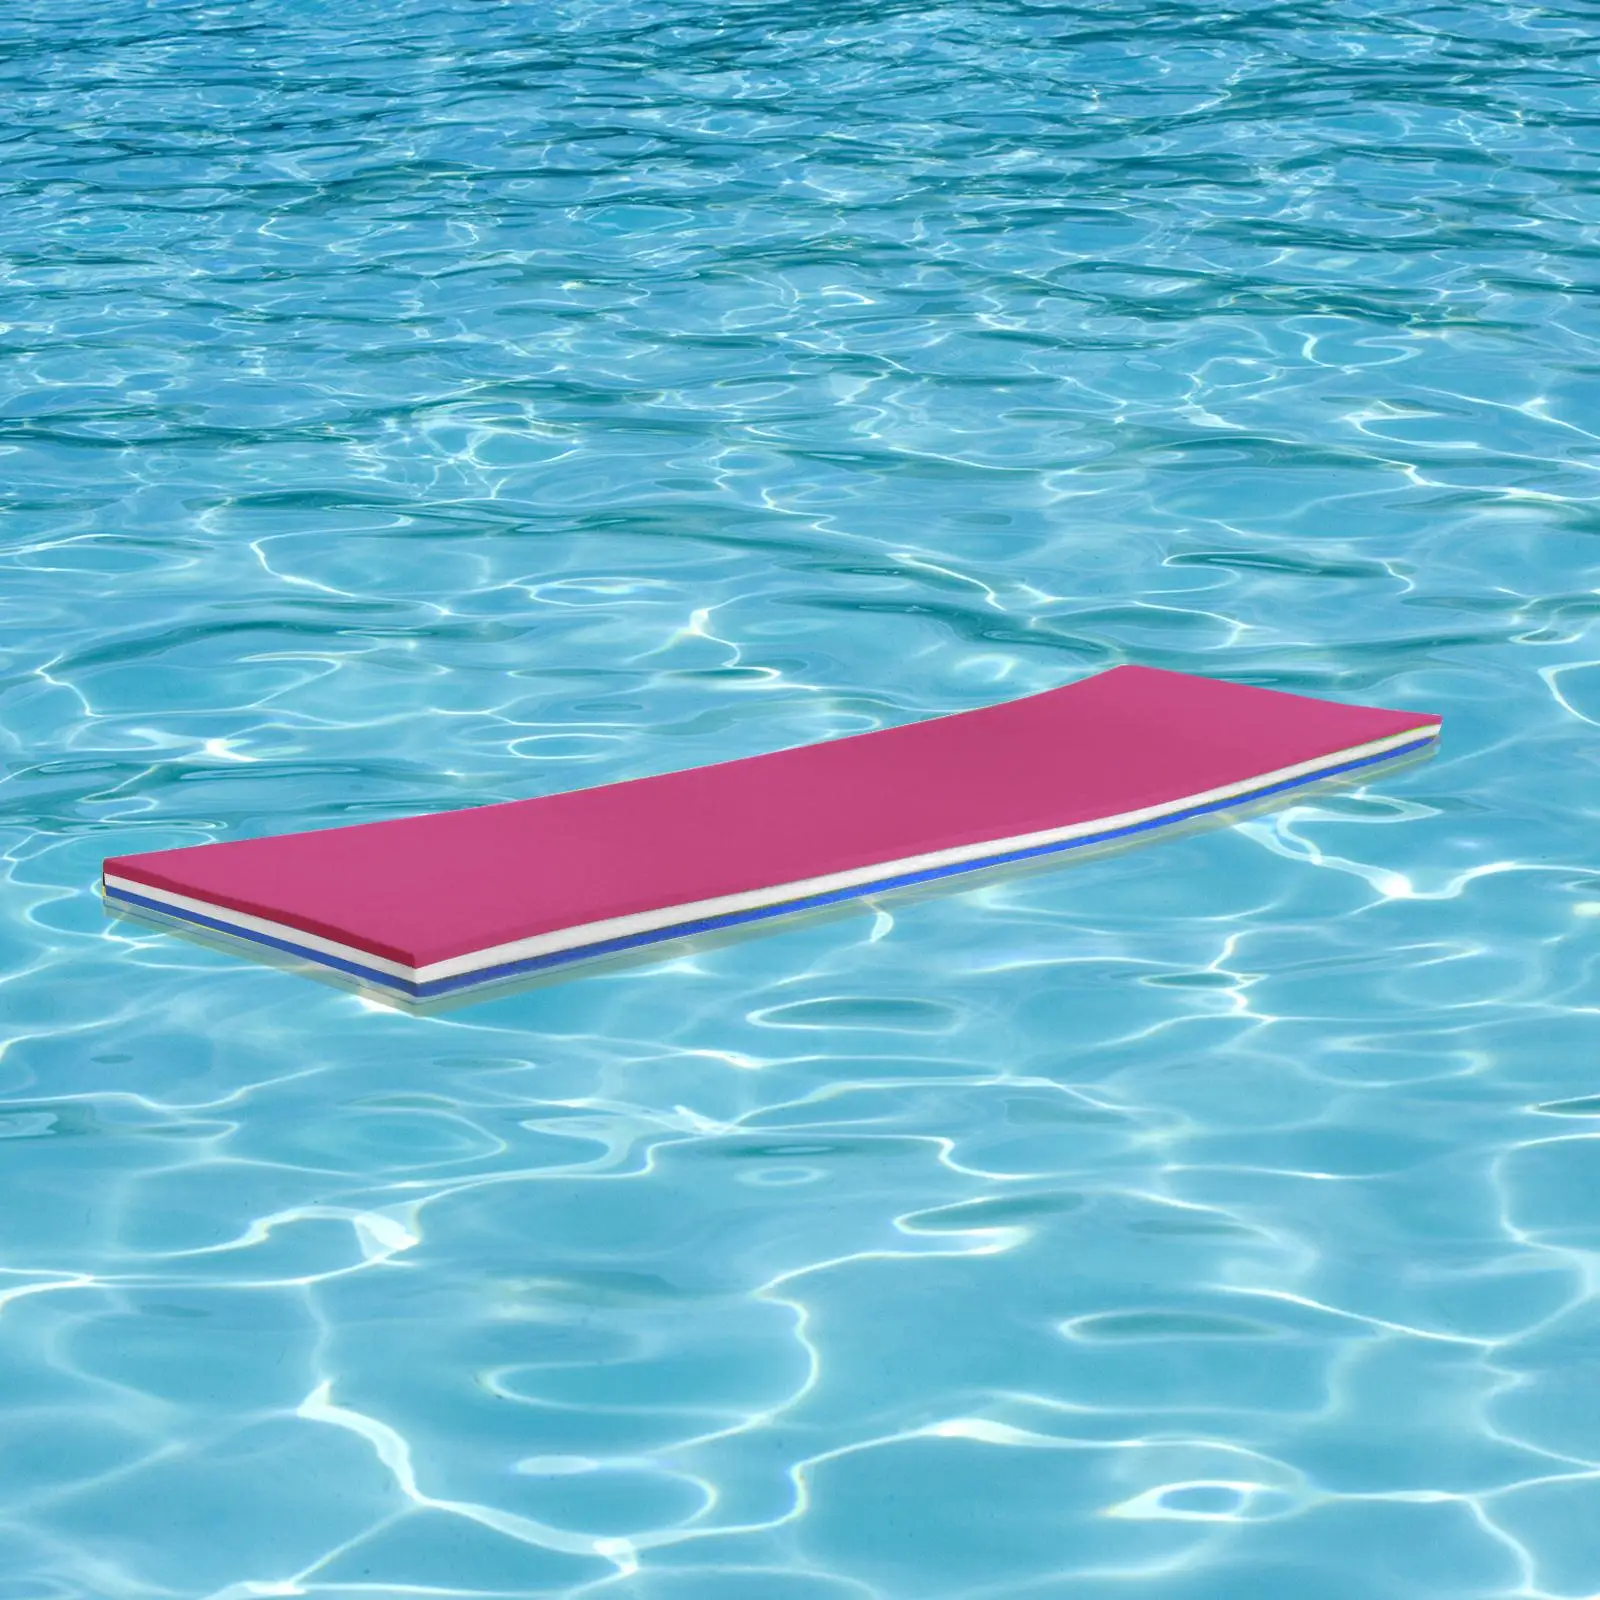 Floating Mat Pad Cushion 3 Layer 110cmx40x3.2cm for River Swimming Pool Summer Sturdy Portable Water Bed Pink White Blue